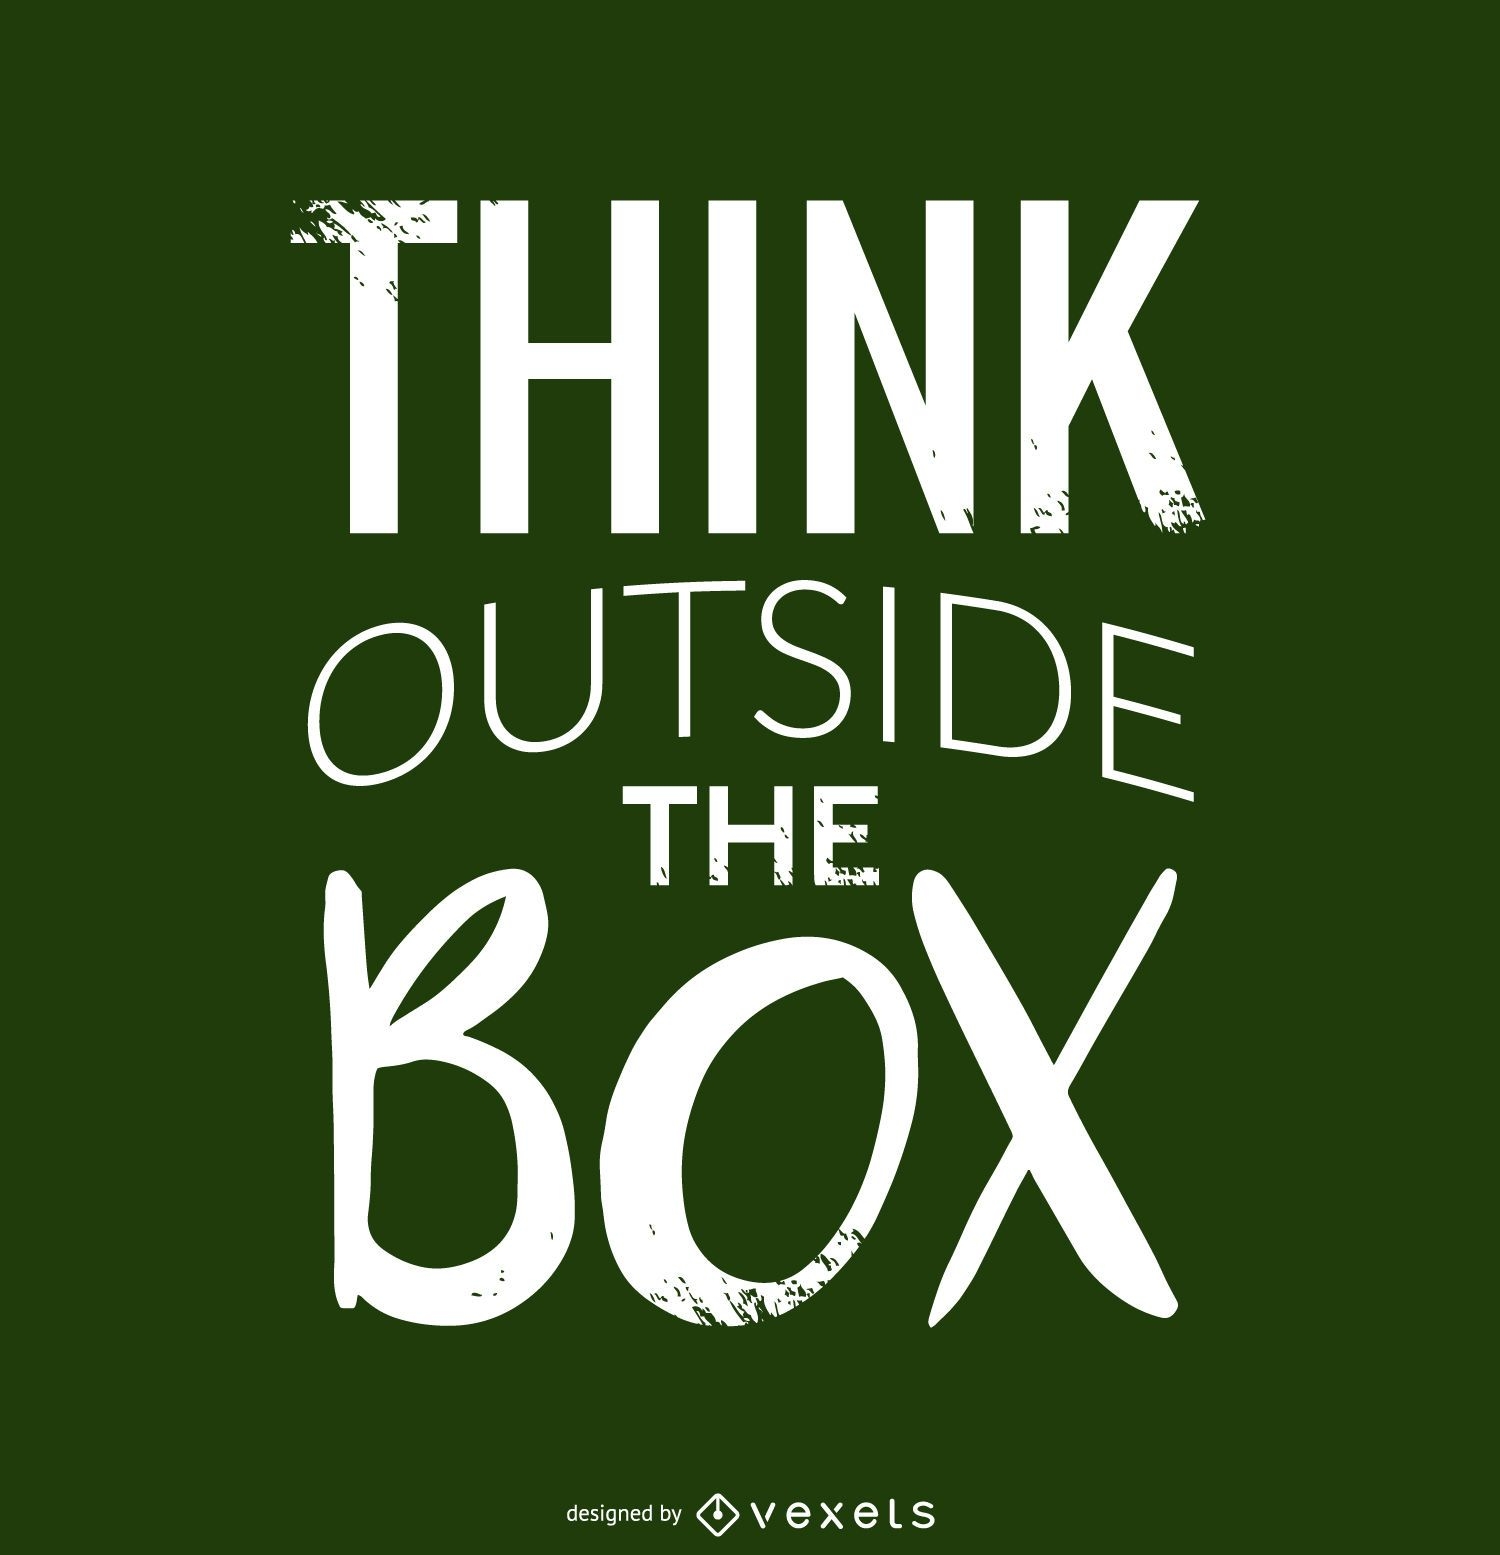 Think outside the box design